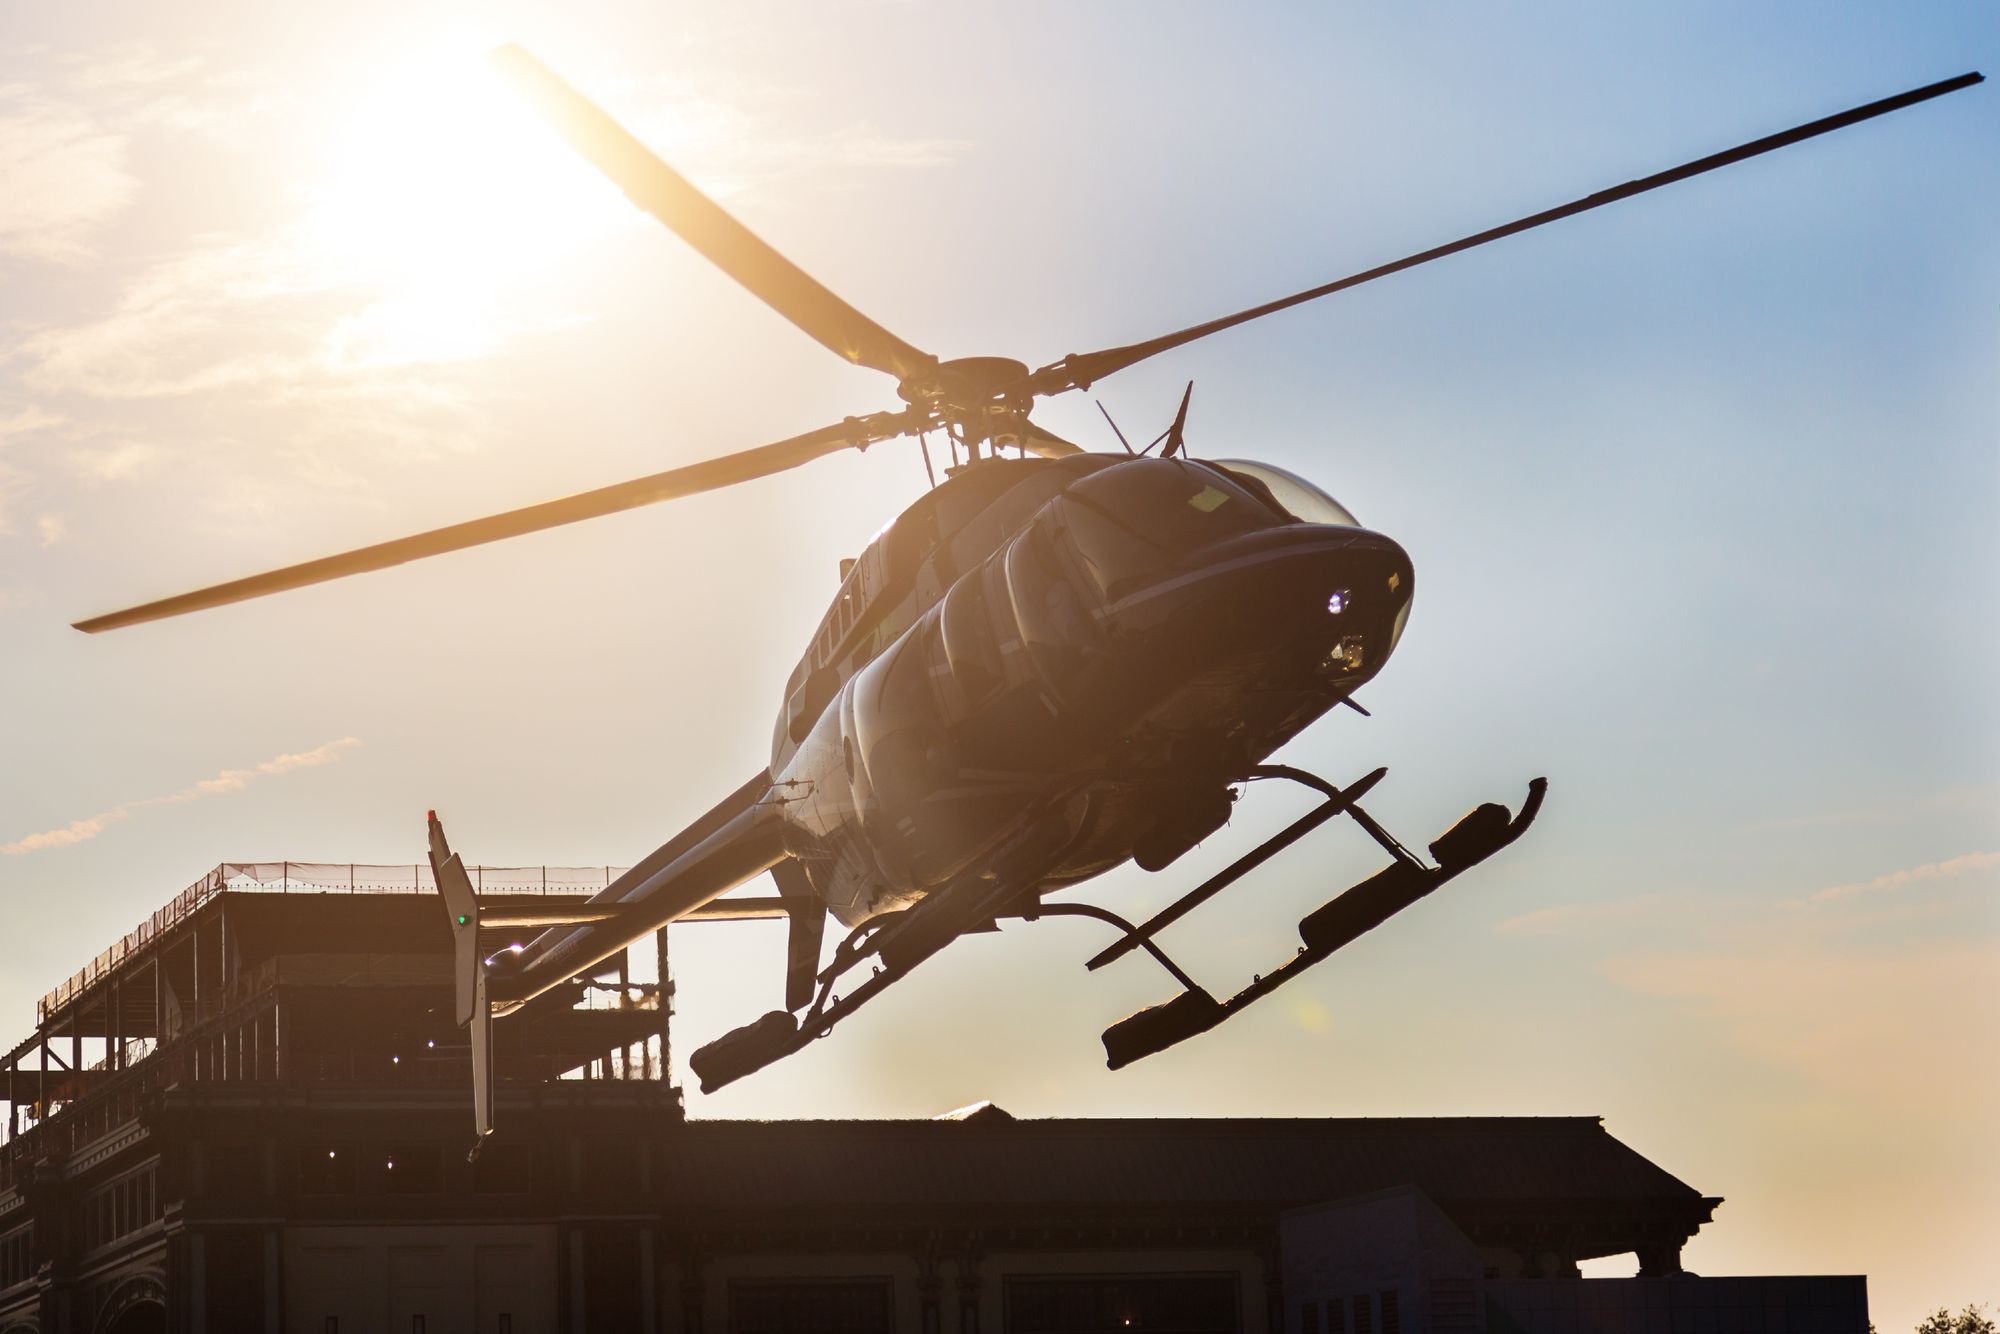 The seller of luxury private helicopters now accepts Bitcoin